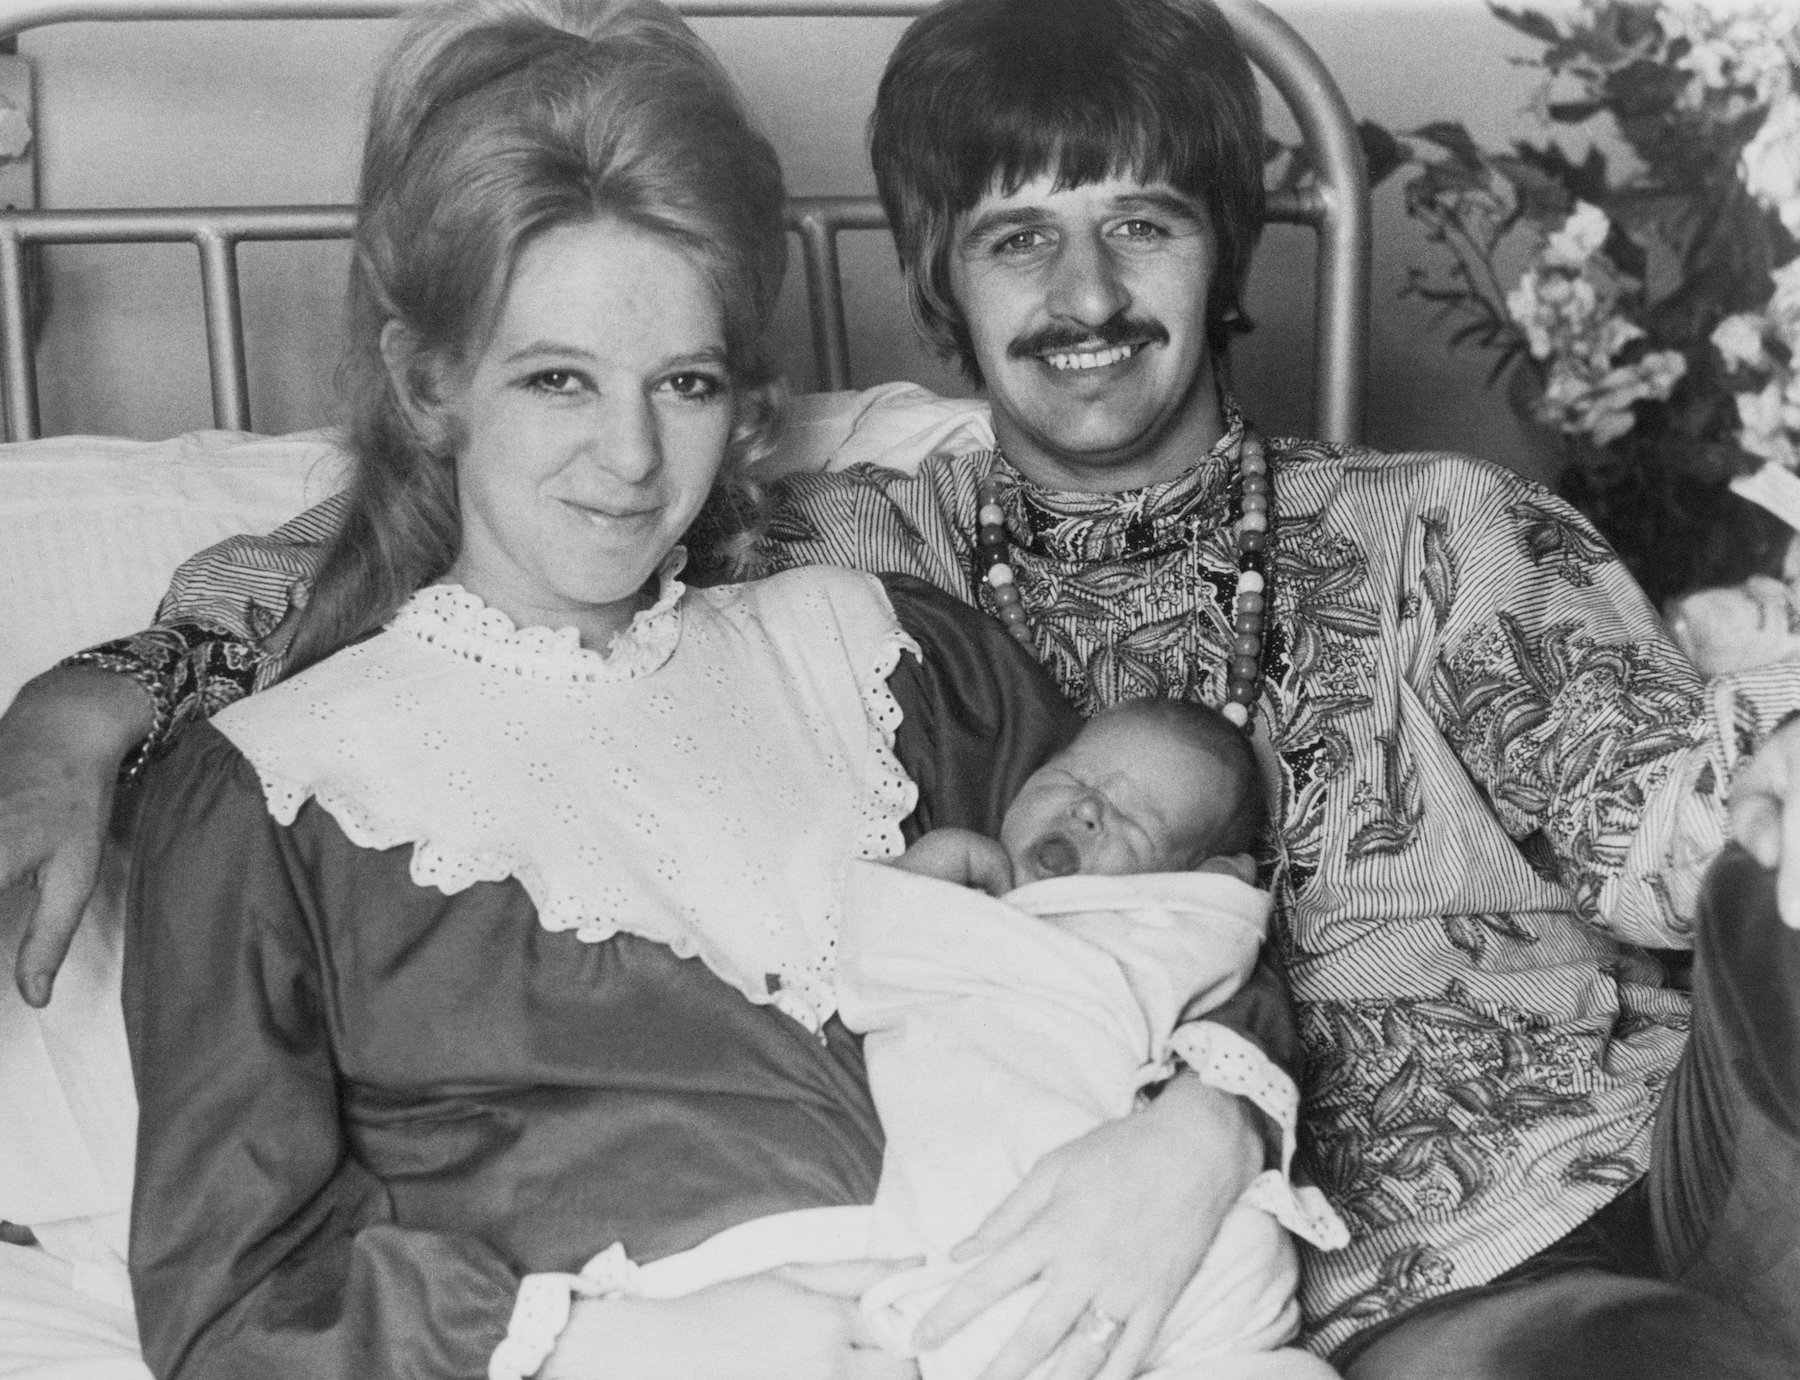 The Beatles' Ringo Starr and his wife Maureen after the birth of their first son, Zak